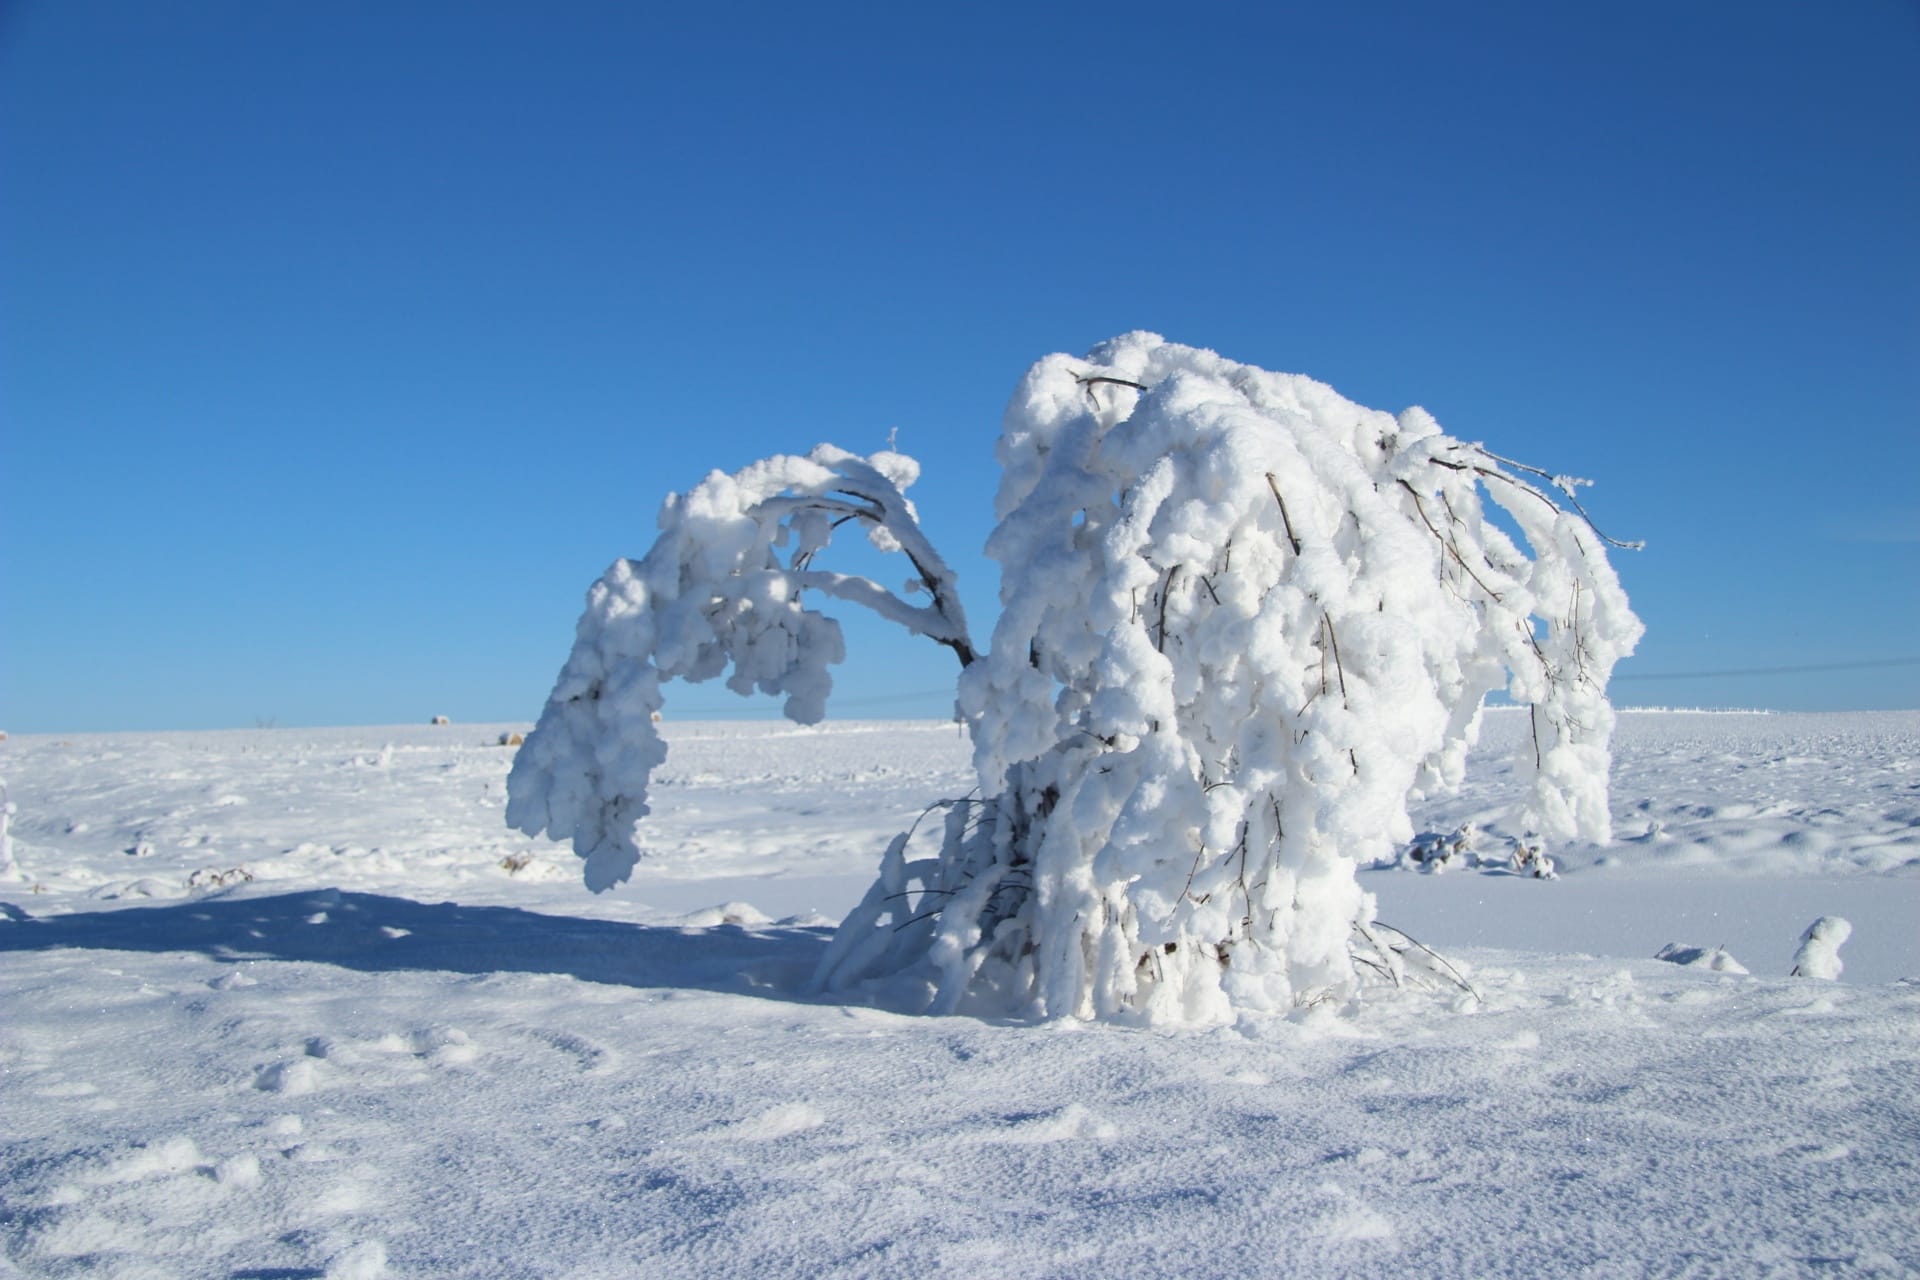 Tree weighed down by snow and ice